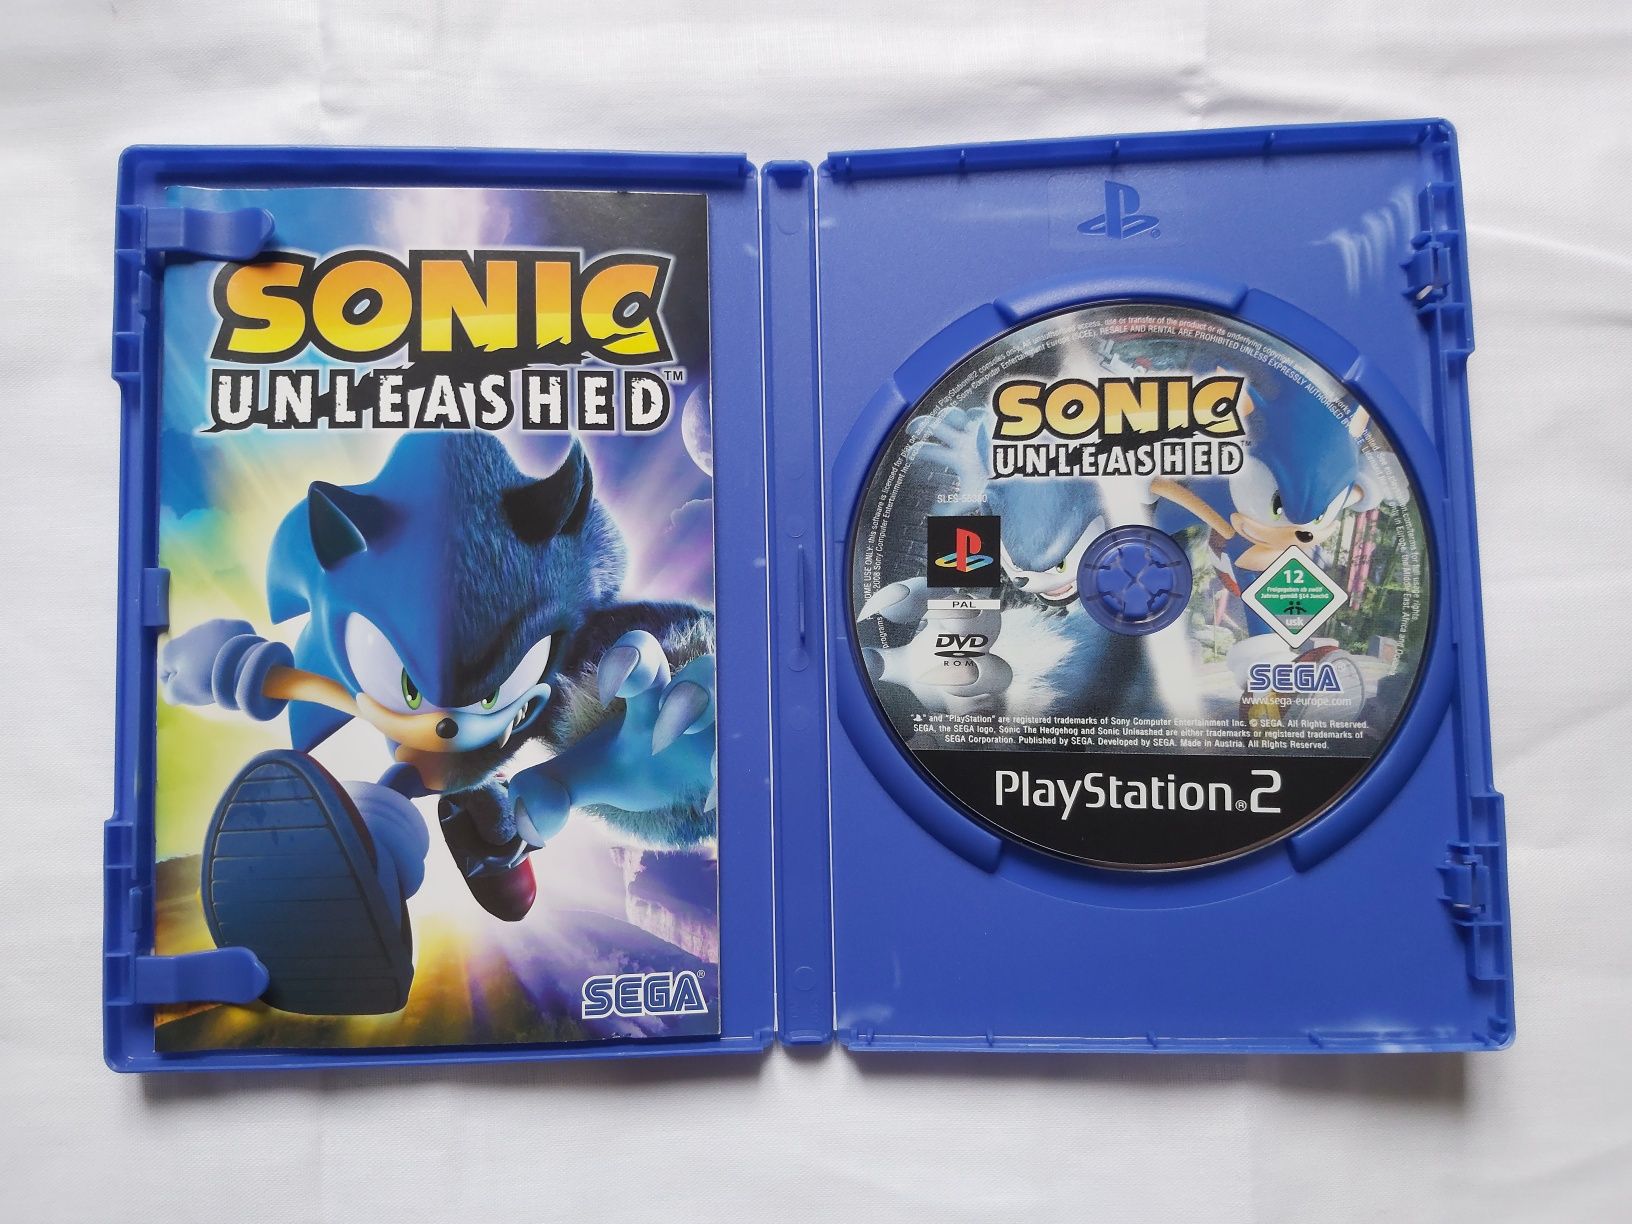 Sonic: Unleashed Playstation 2 (PS2)